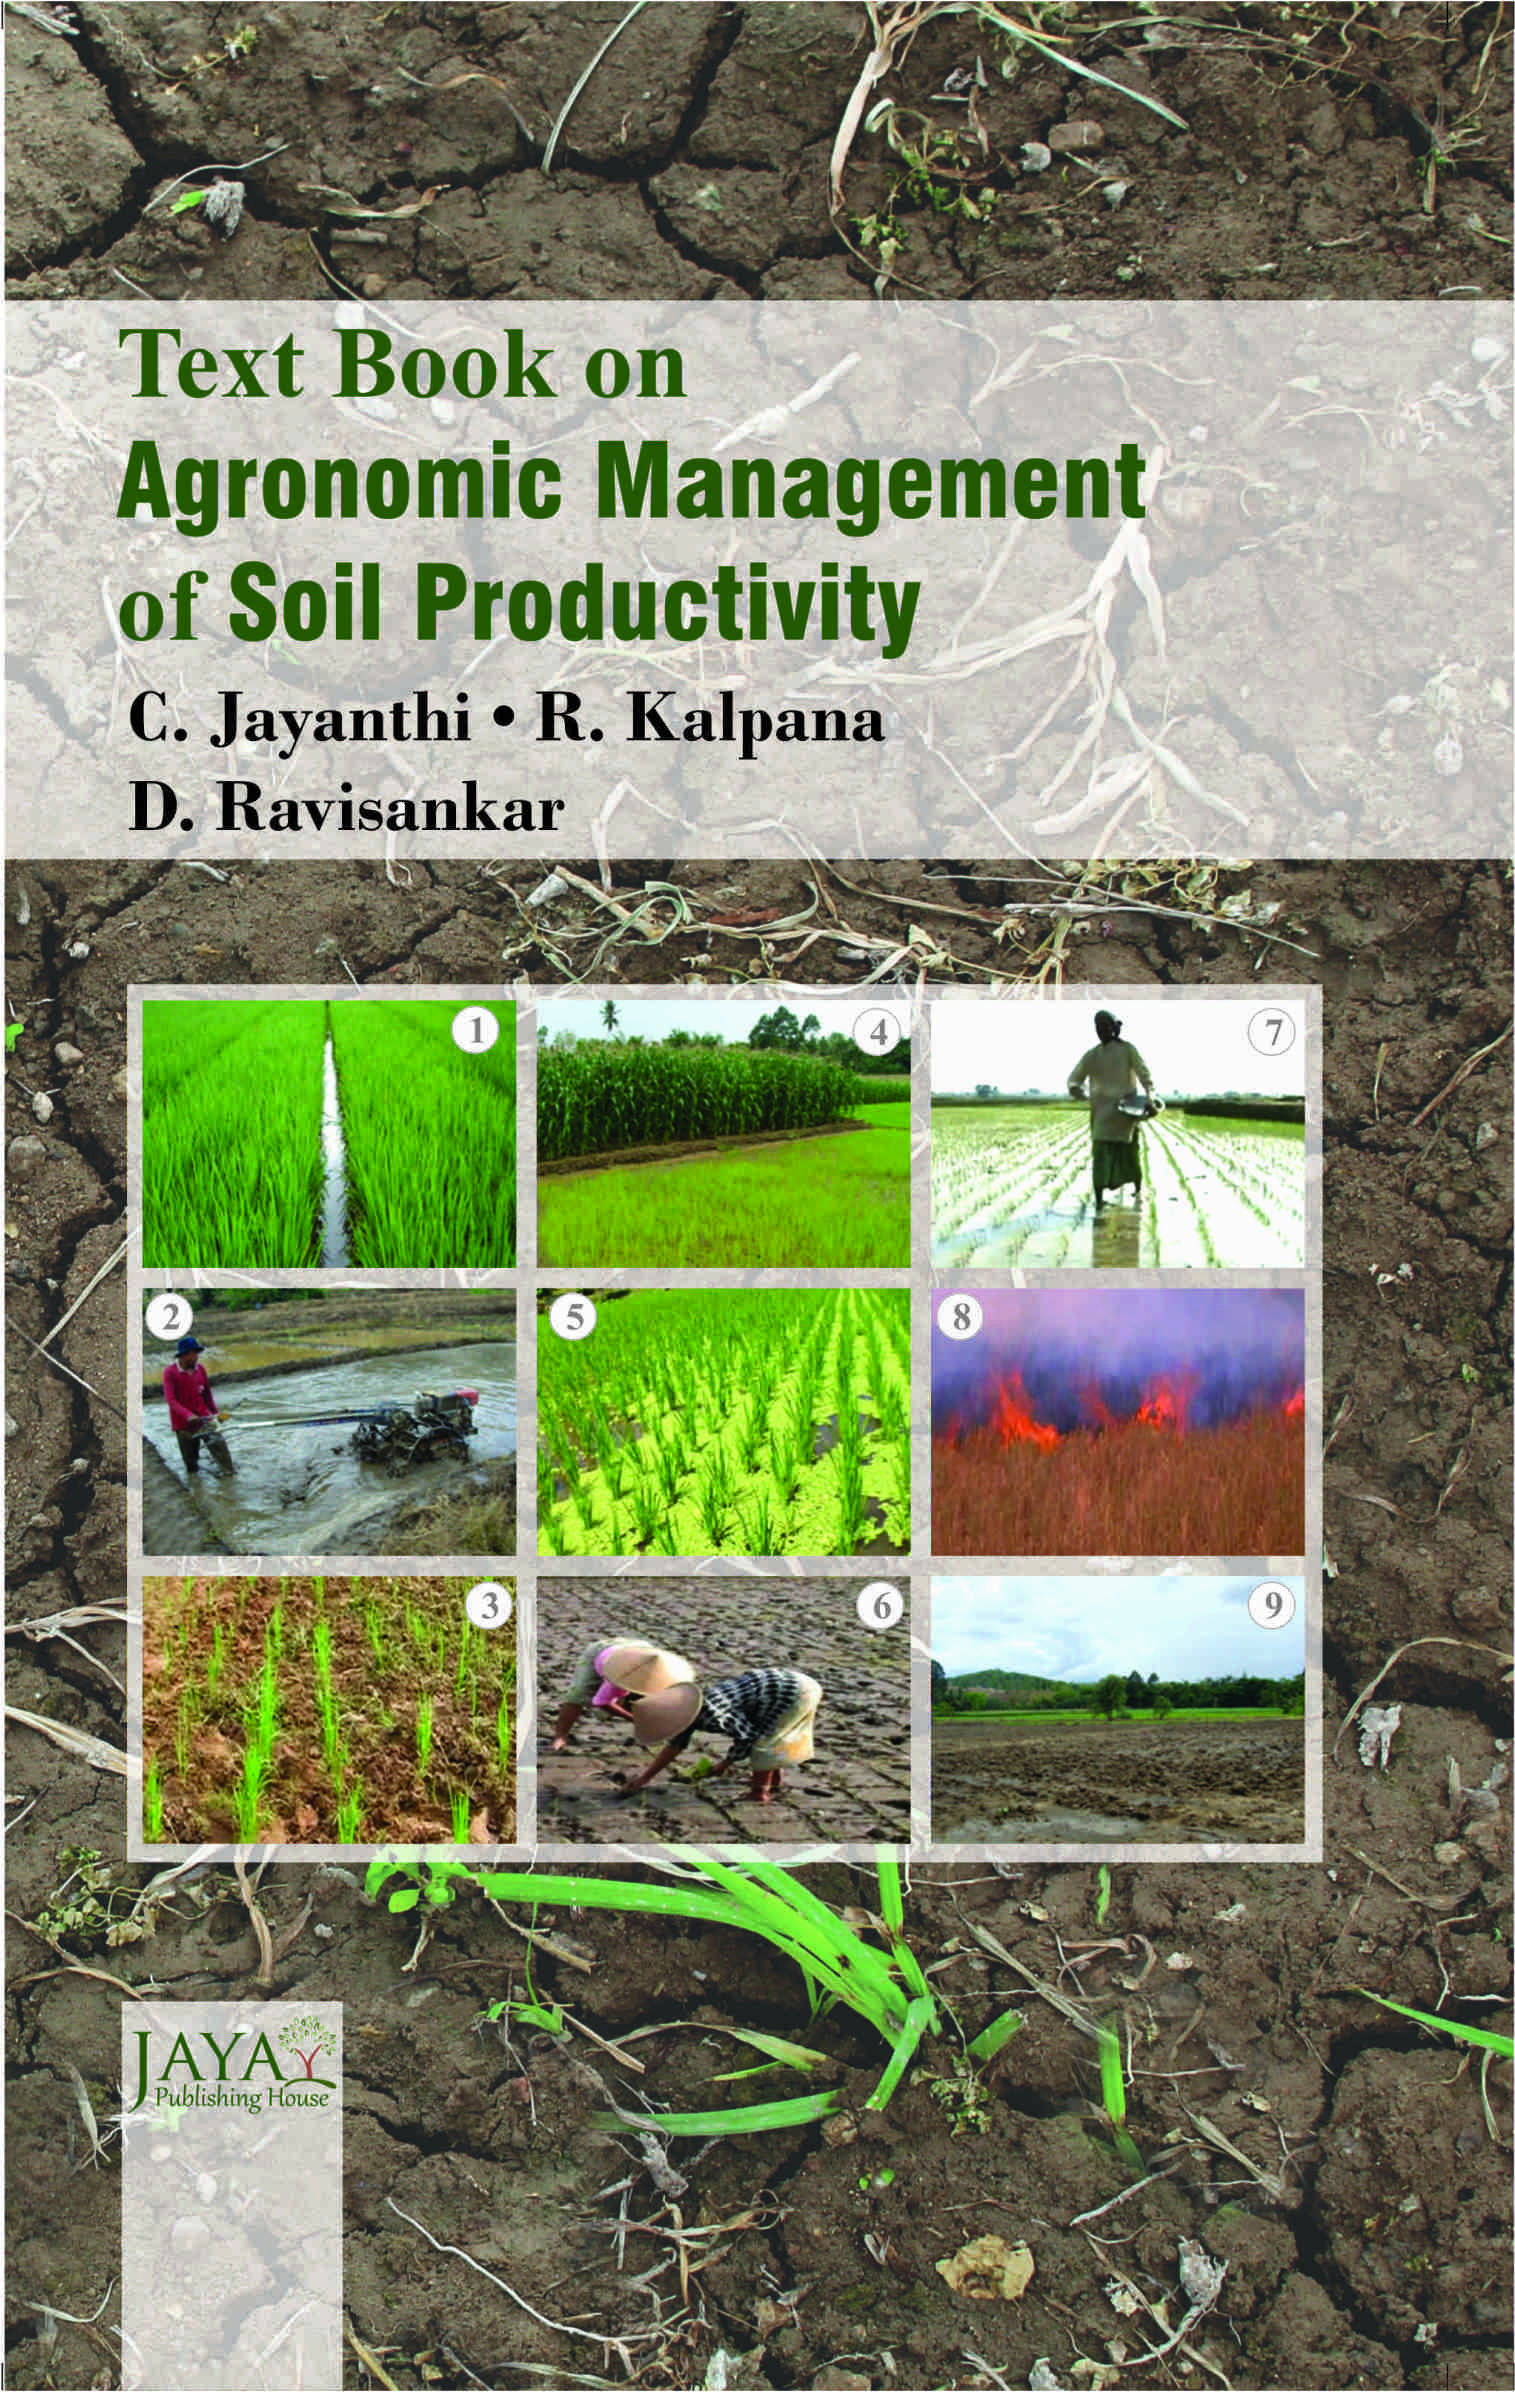 Text Book on Agronomic Management of Soil Productivity